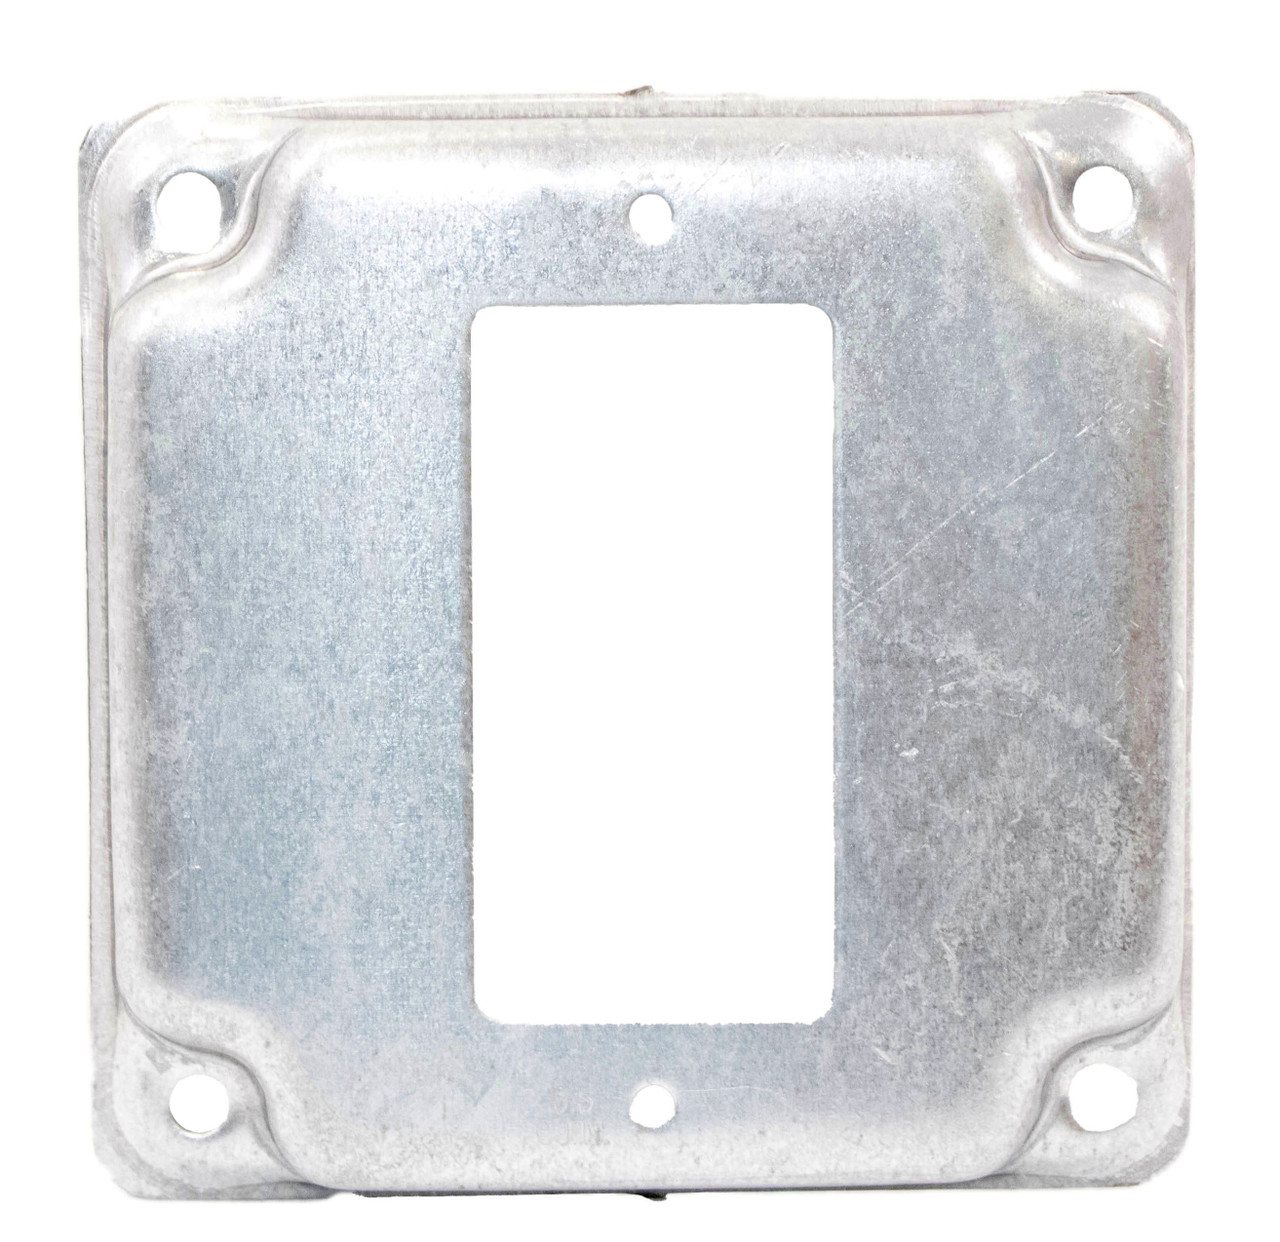 Eaton TP513 4 Inch Square Surface Cover 665277